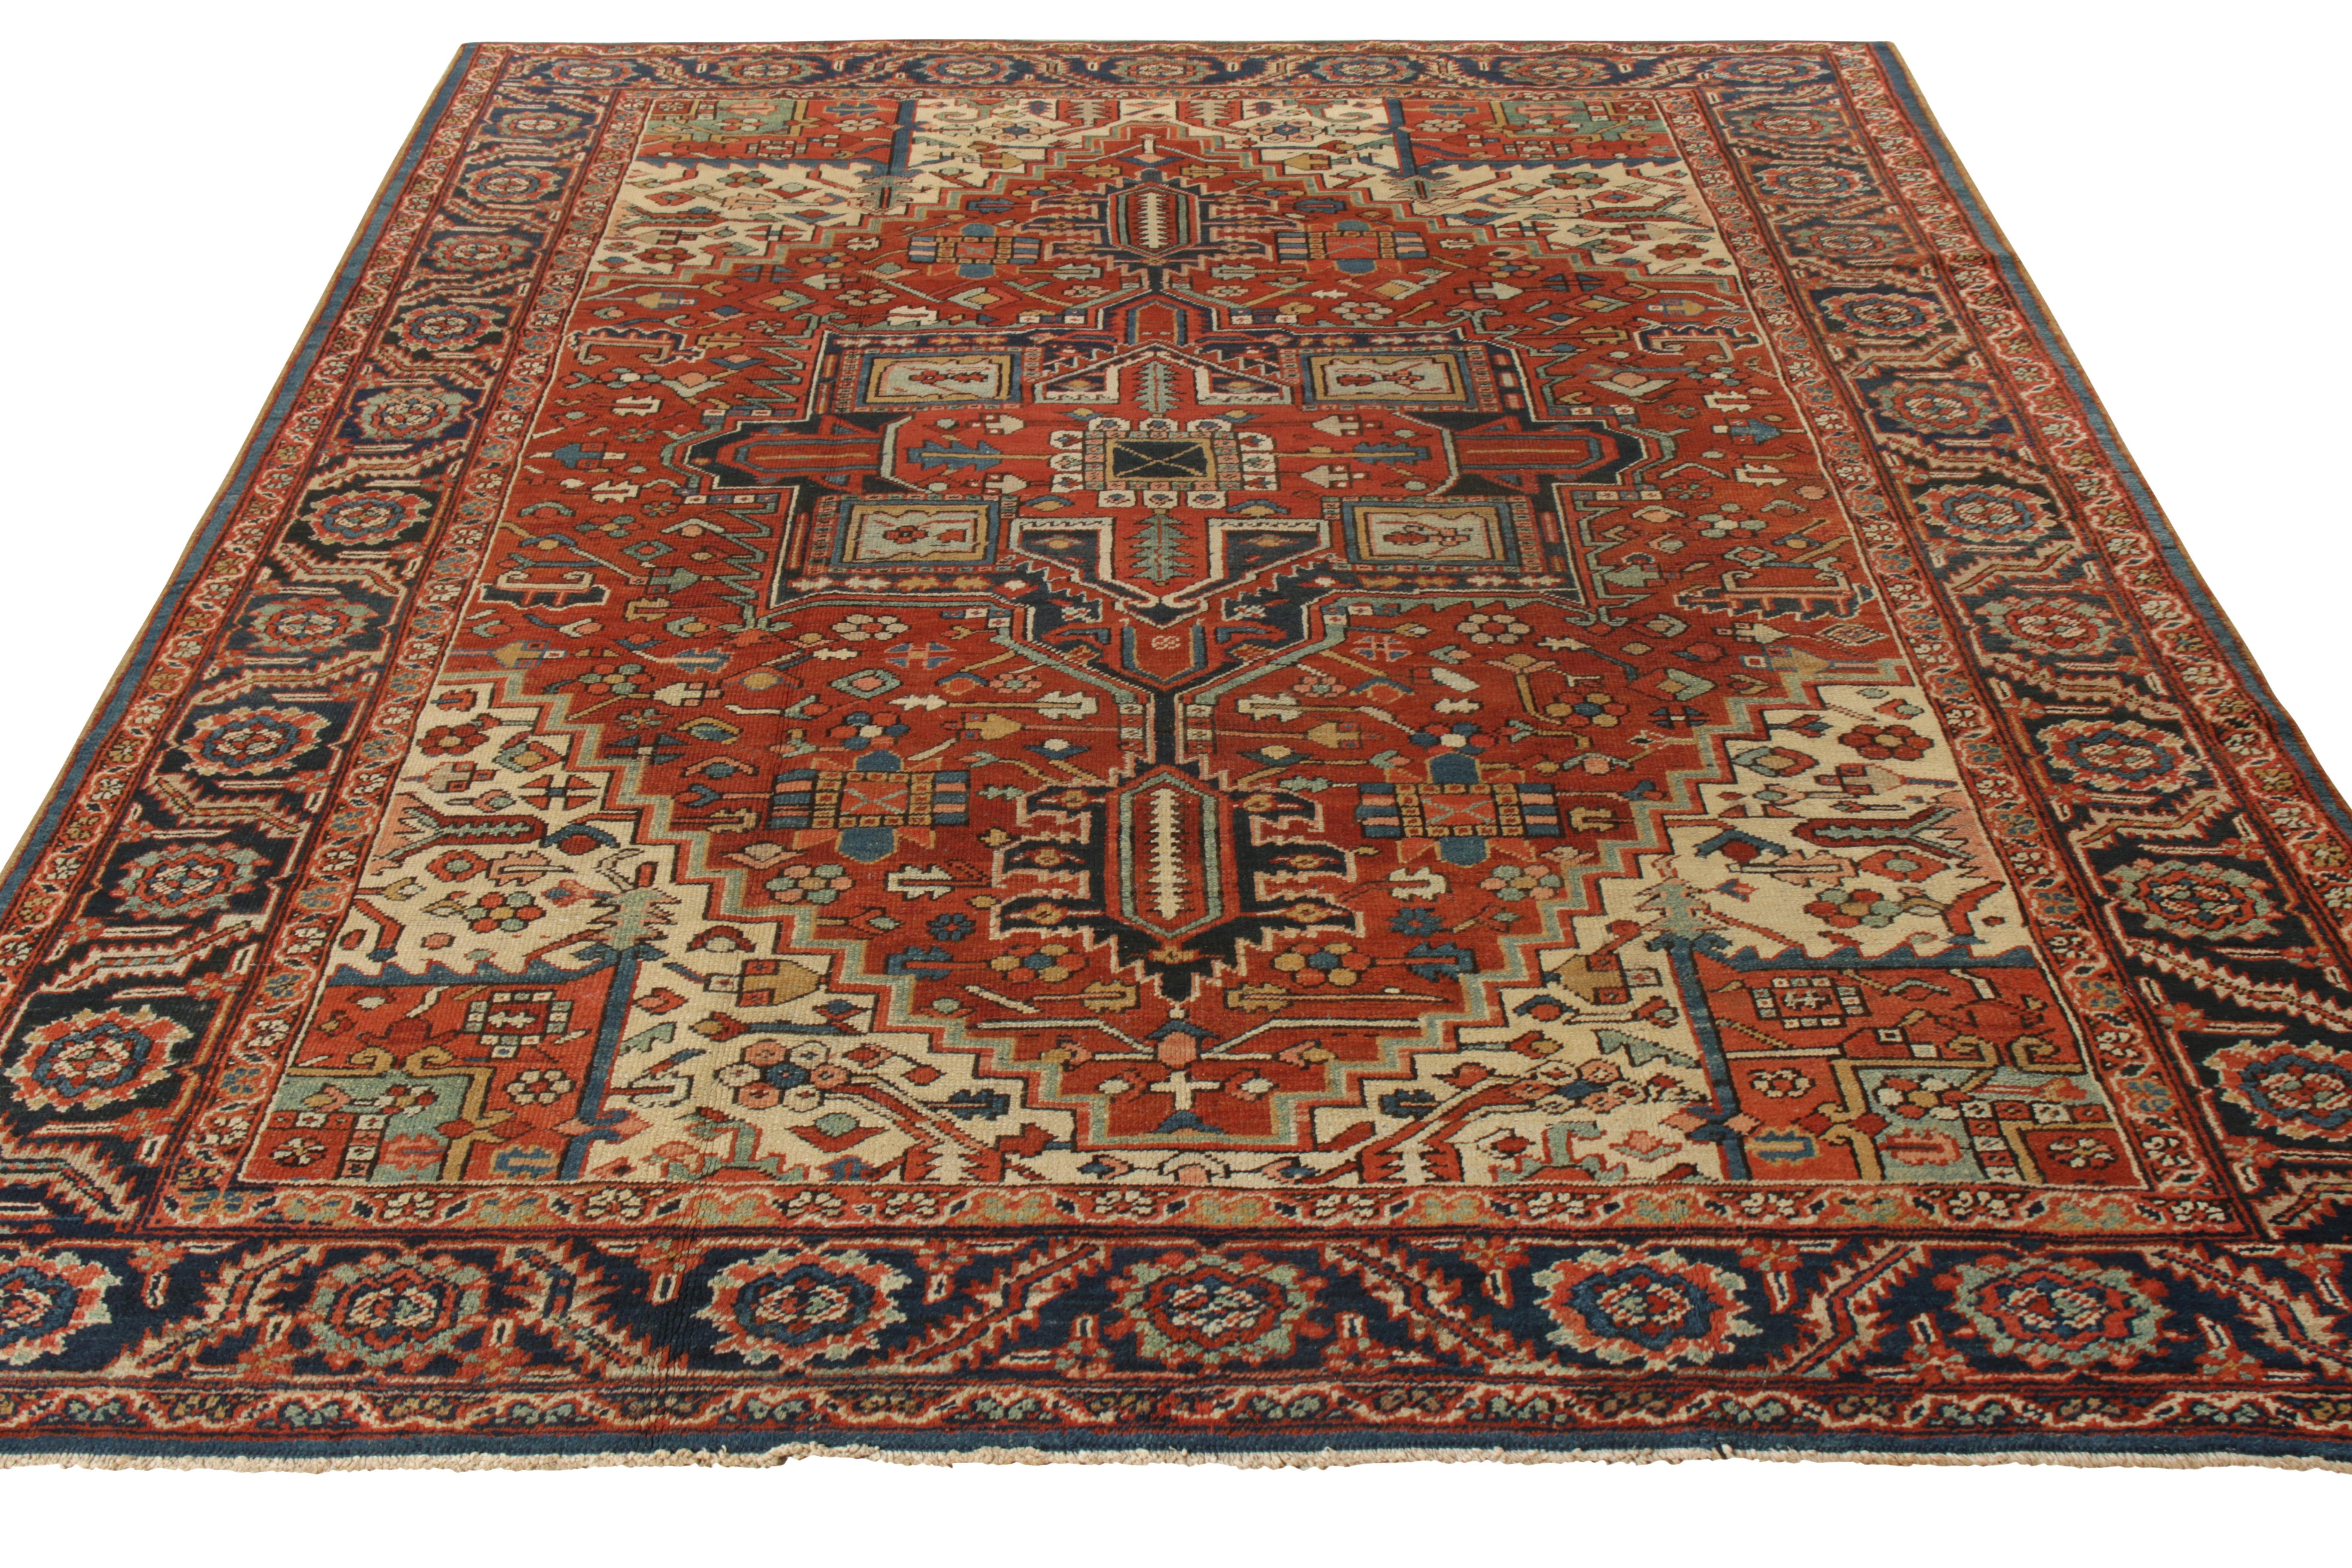 Hand knotted in wool, an antique 9x11 Persian Heriz rug joining Rug & Kilim’s coveted Antique & Vintage collection. Originating circa 1920-1930, the piece exudes traditional tribal vibes by showcasing an impeccable play of geometric elements and